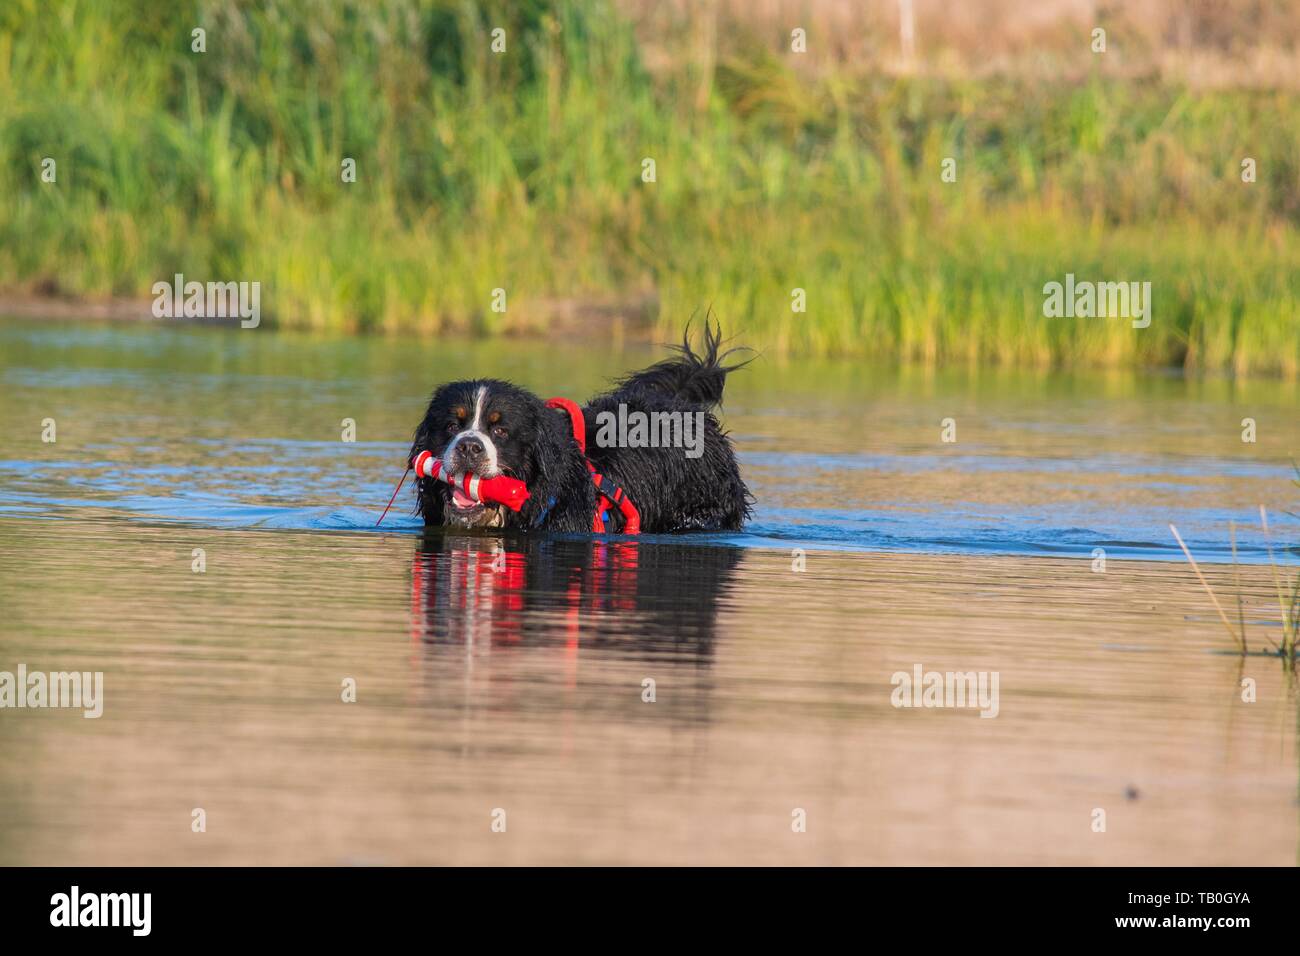 Bernese Mountain Dog is trained as a water rescue dog Stock Photo